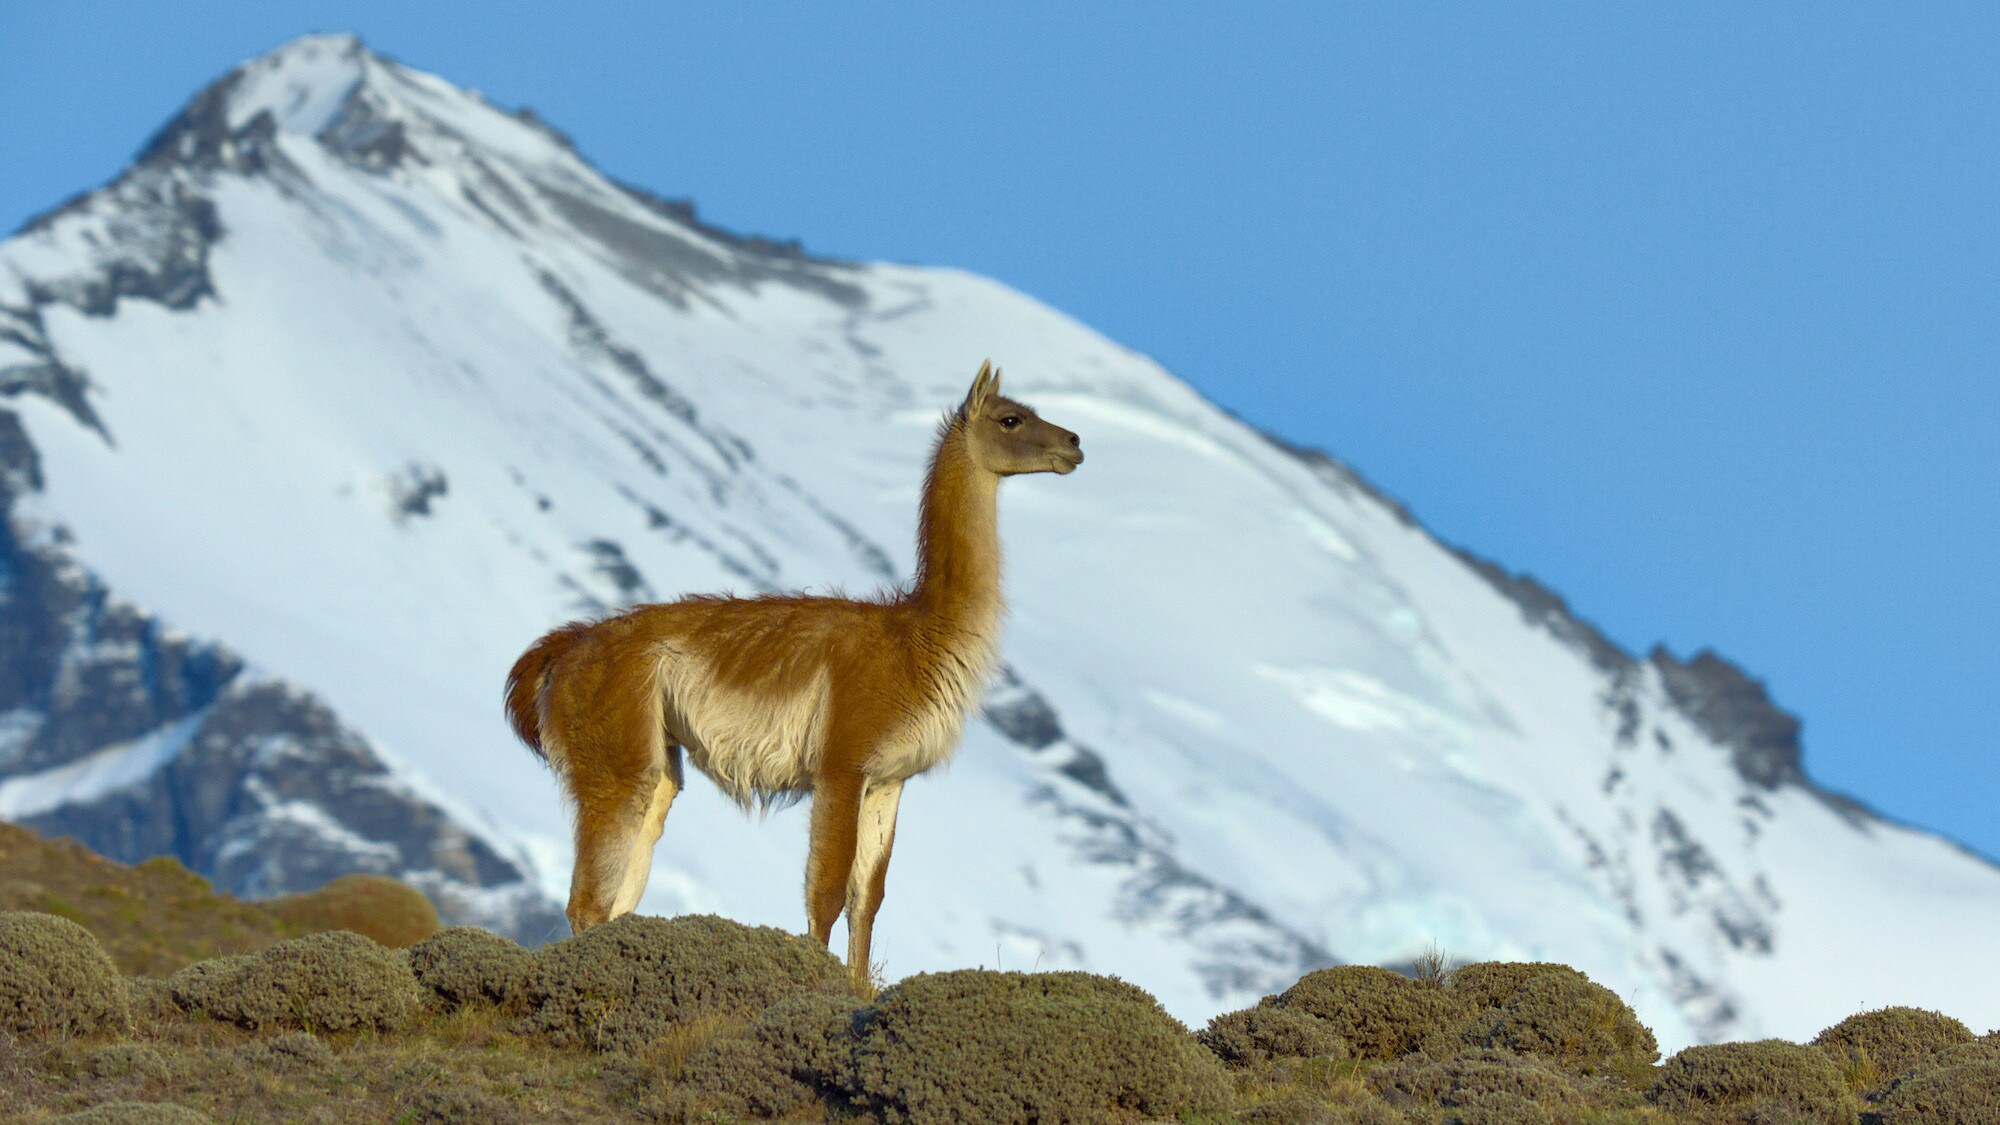 A Guanaco in Patagonia. (National Geographic for Disney+/Sam Stewart)